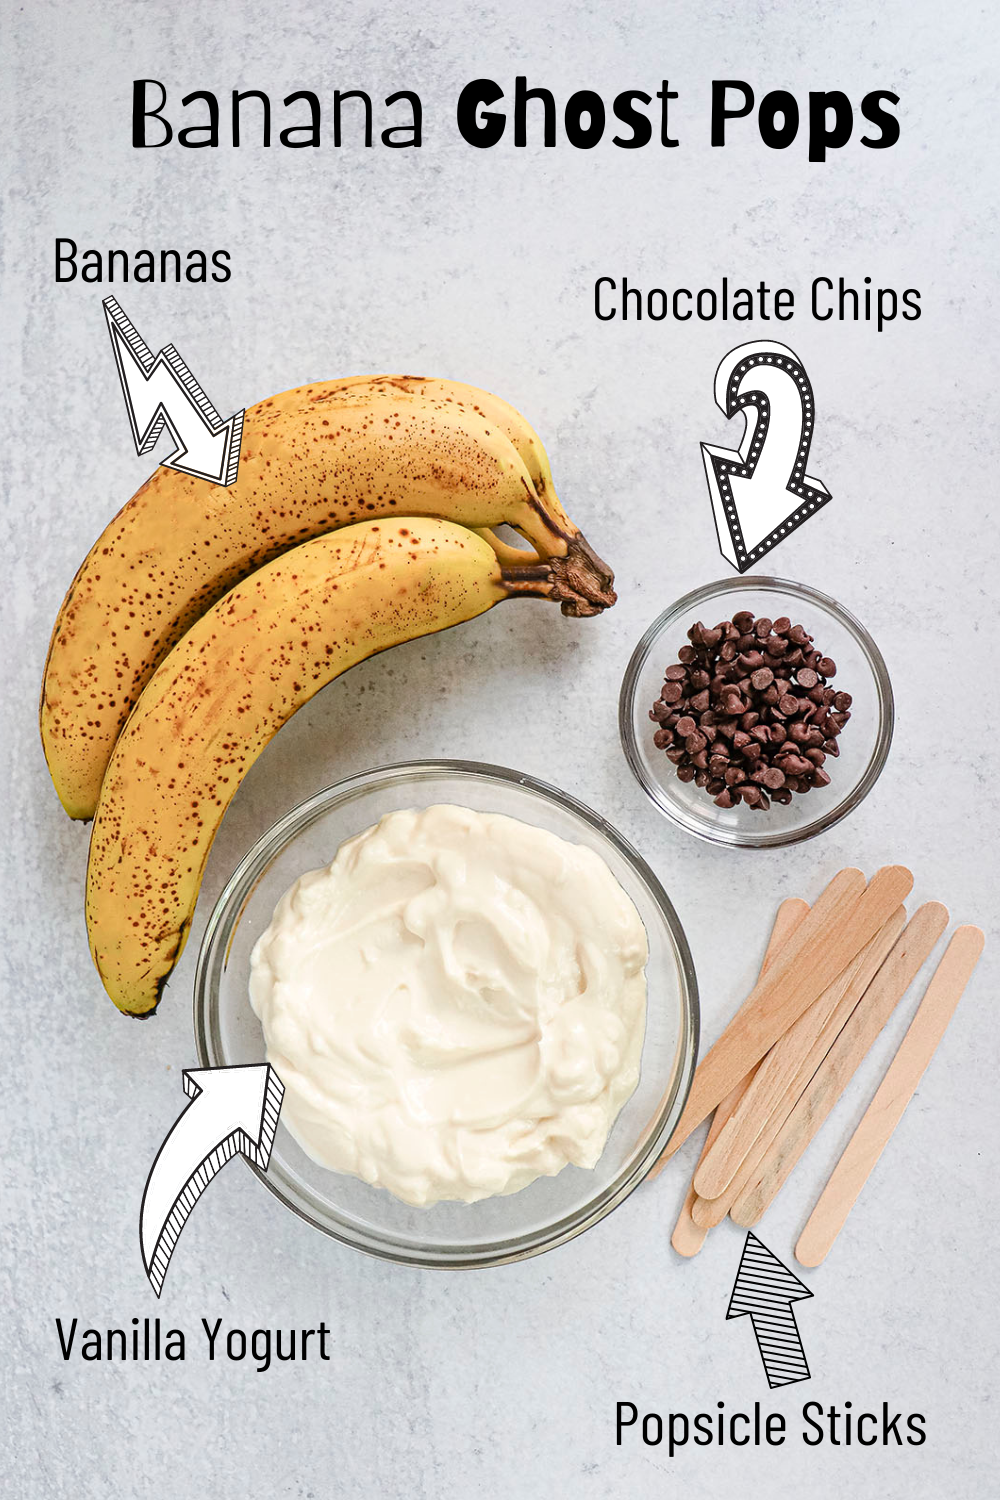 The three ingredients needed for this recipe. Bananas, chocolate chips and vanilla yogurt. There are popsicle sticks on the bottom right.